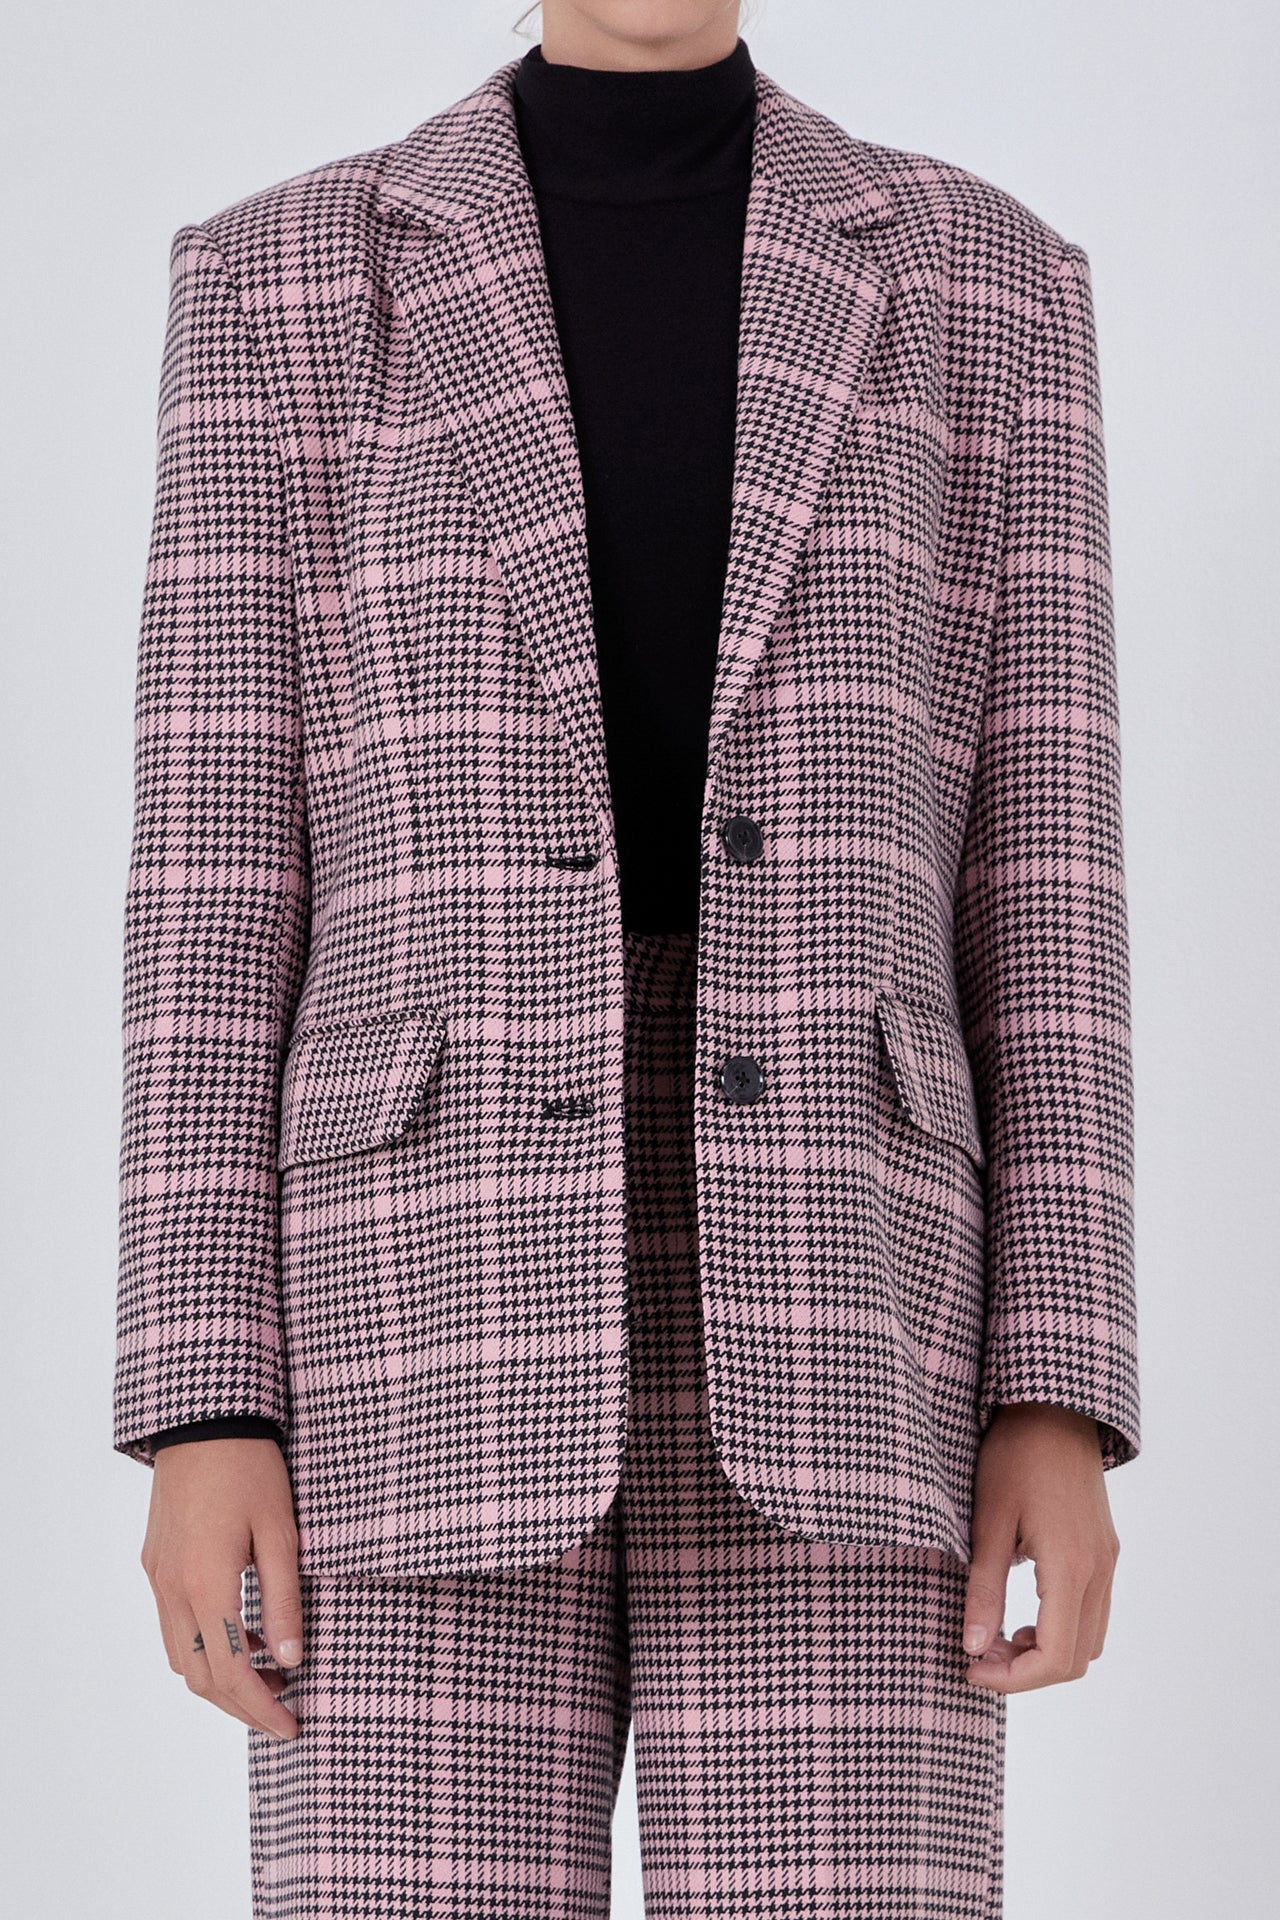 Endless Rose - Houndstooth Oversize Blazer - Blazers in Women's Clothing available at endlessrose.com